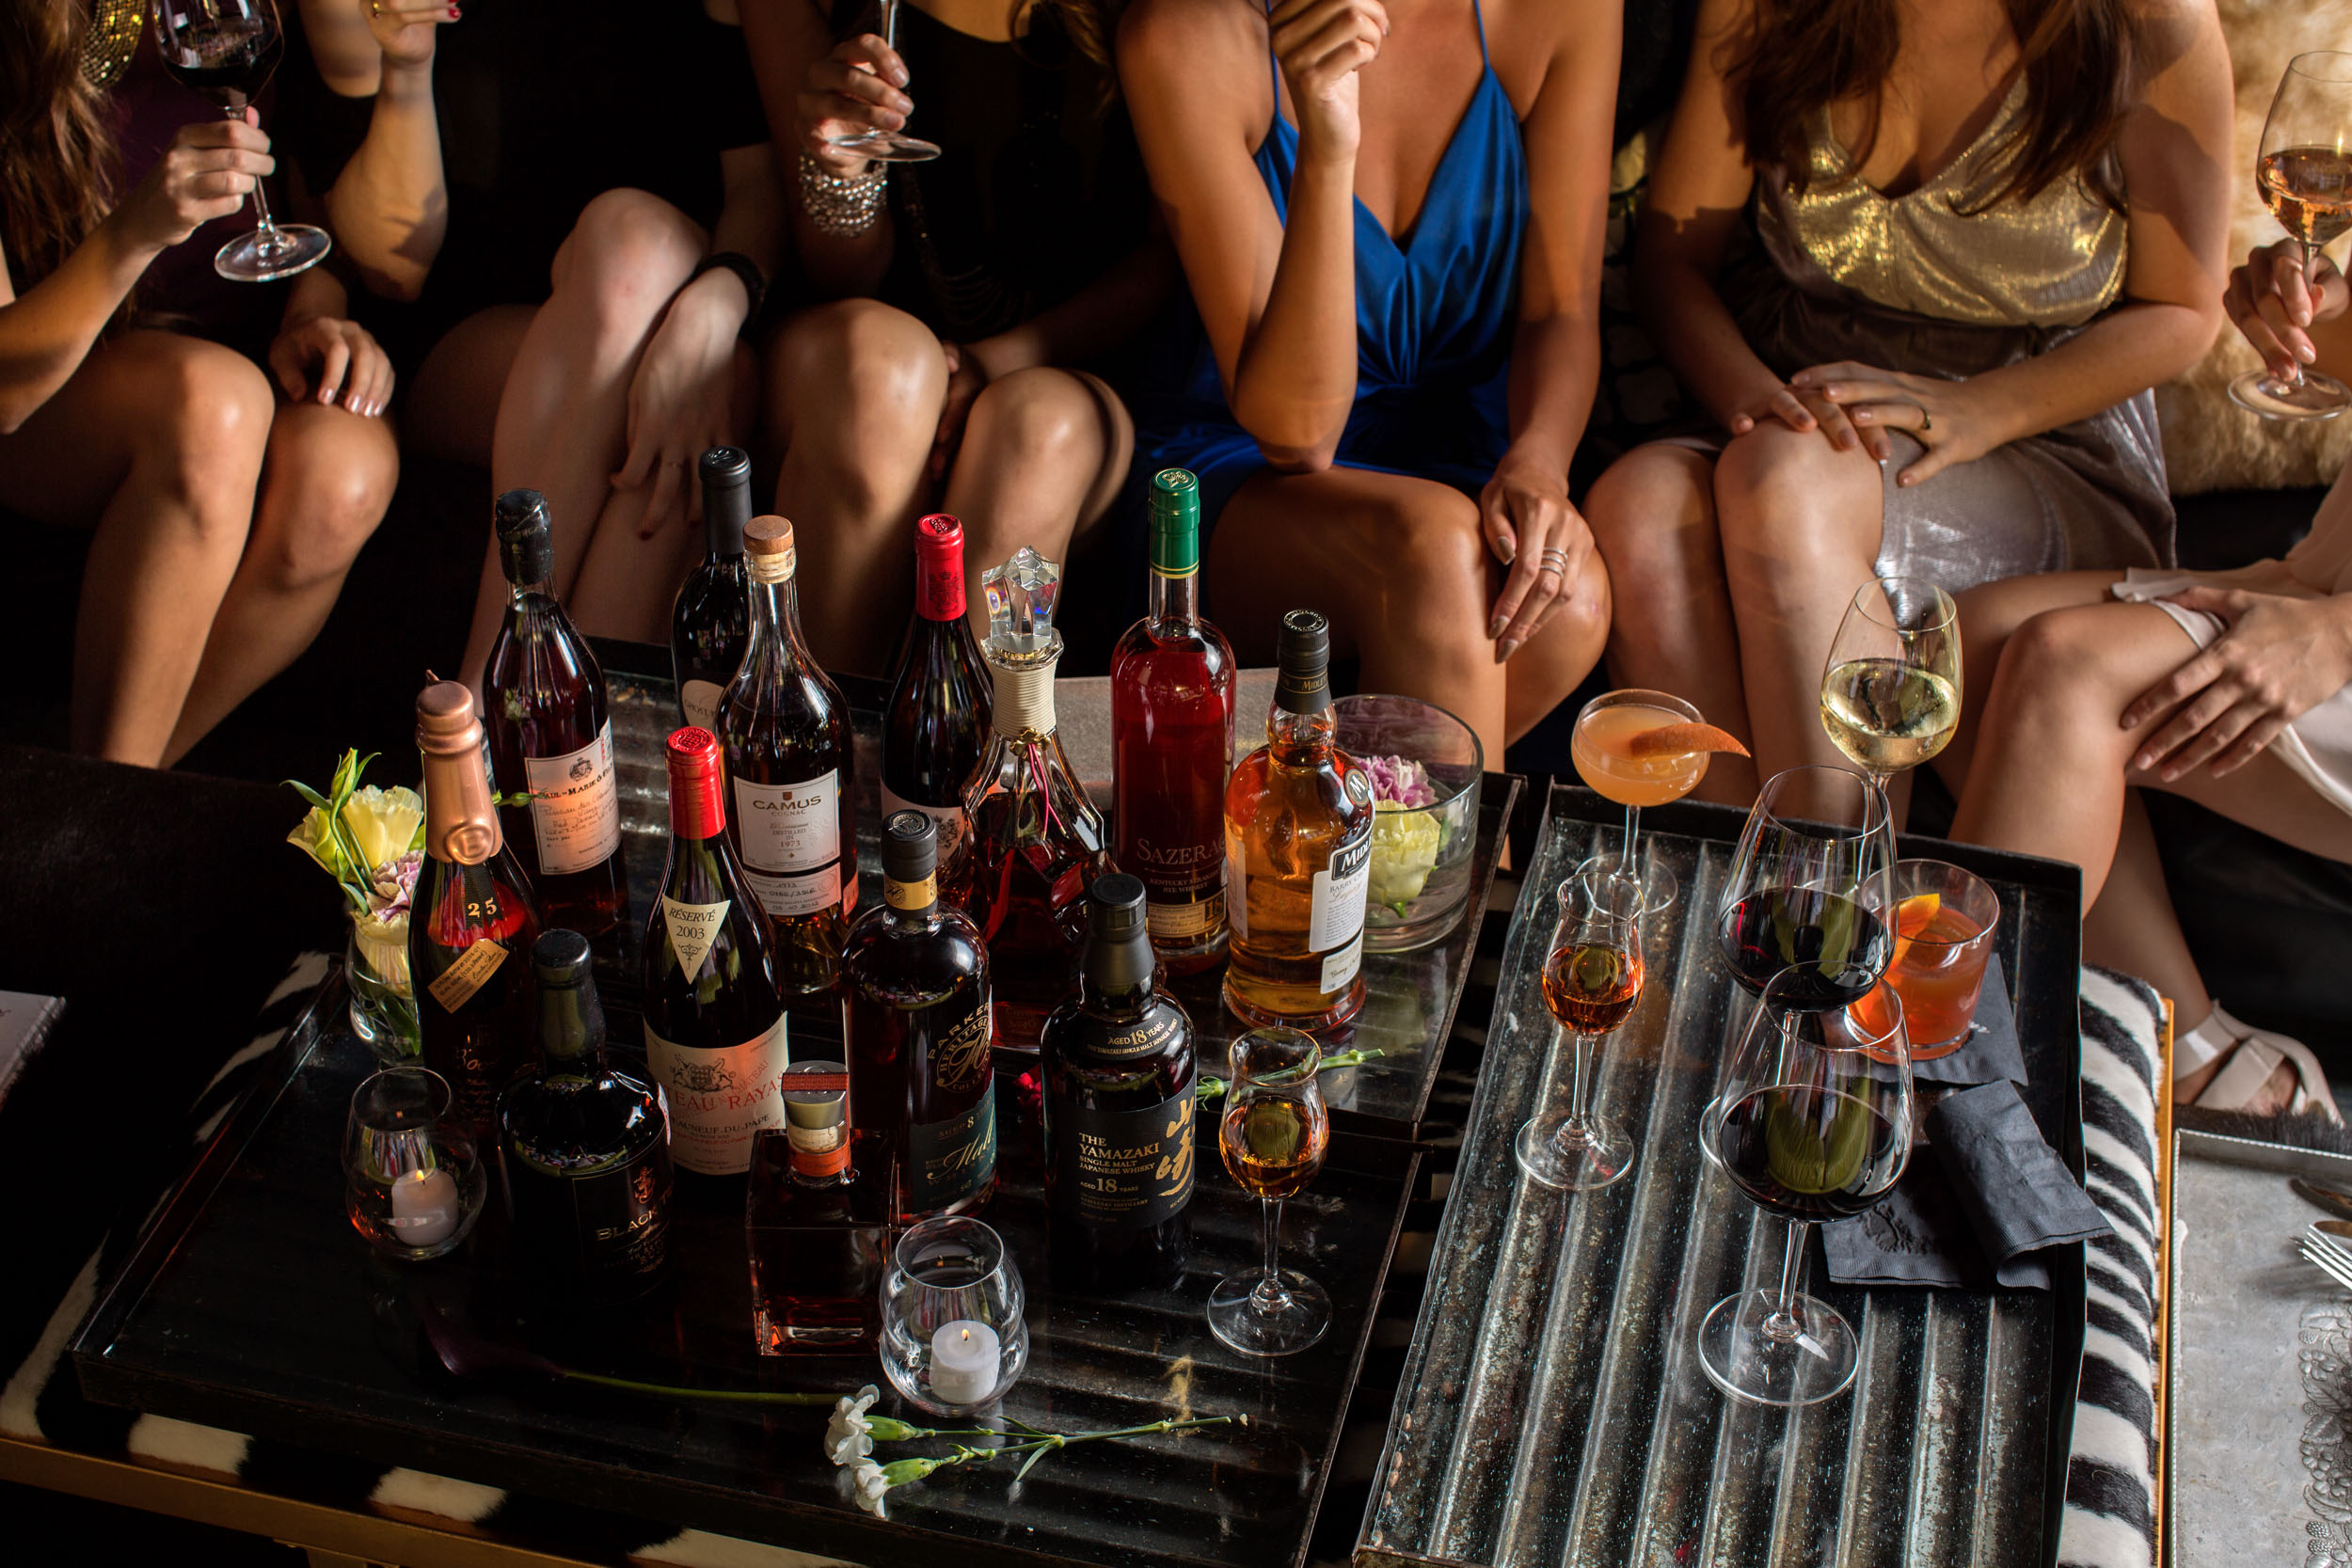 table of spirit bottles and cocktails with women sitting on couch